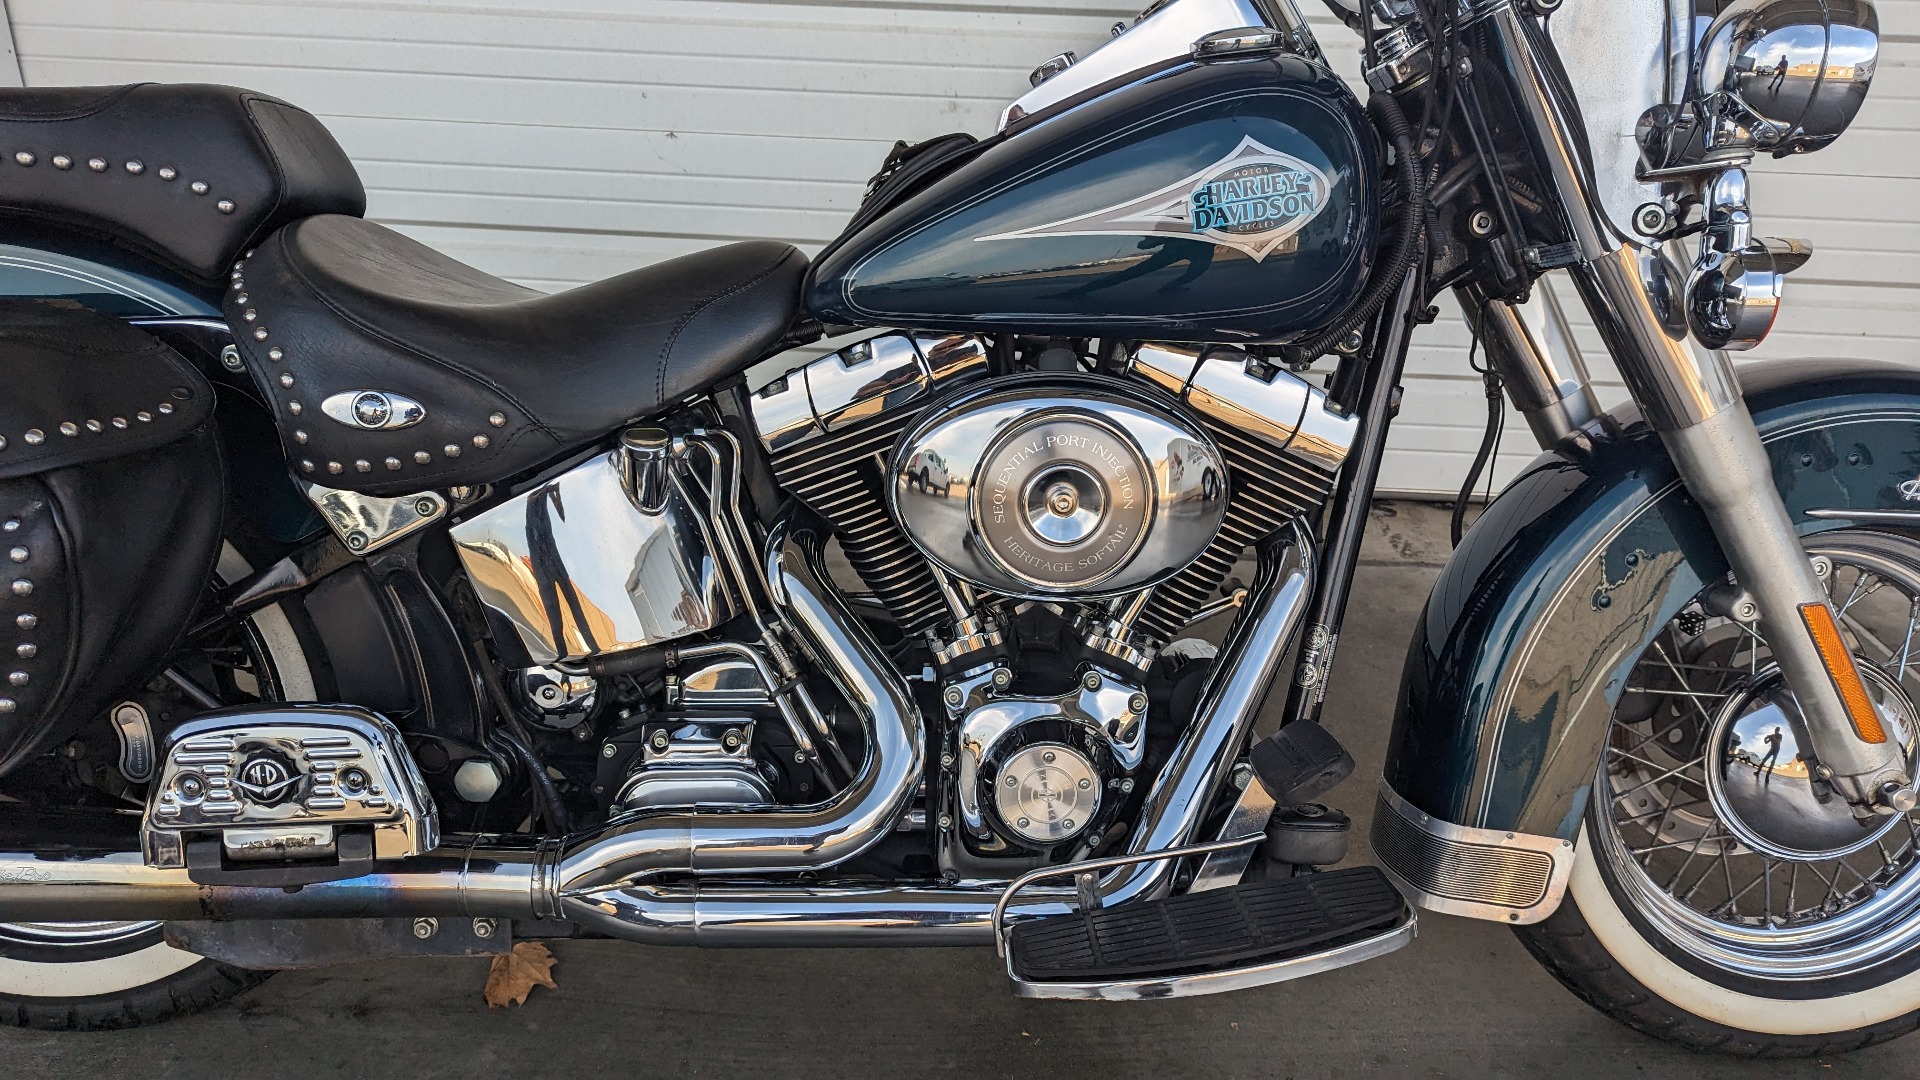 harley heritage softail for sale in mississippi - Photo 4